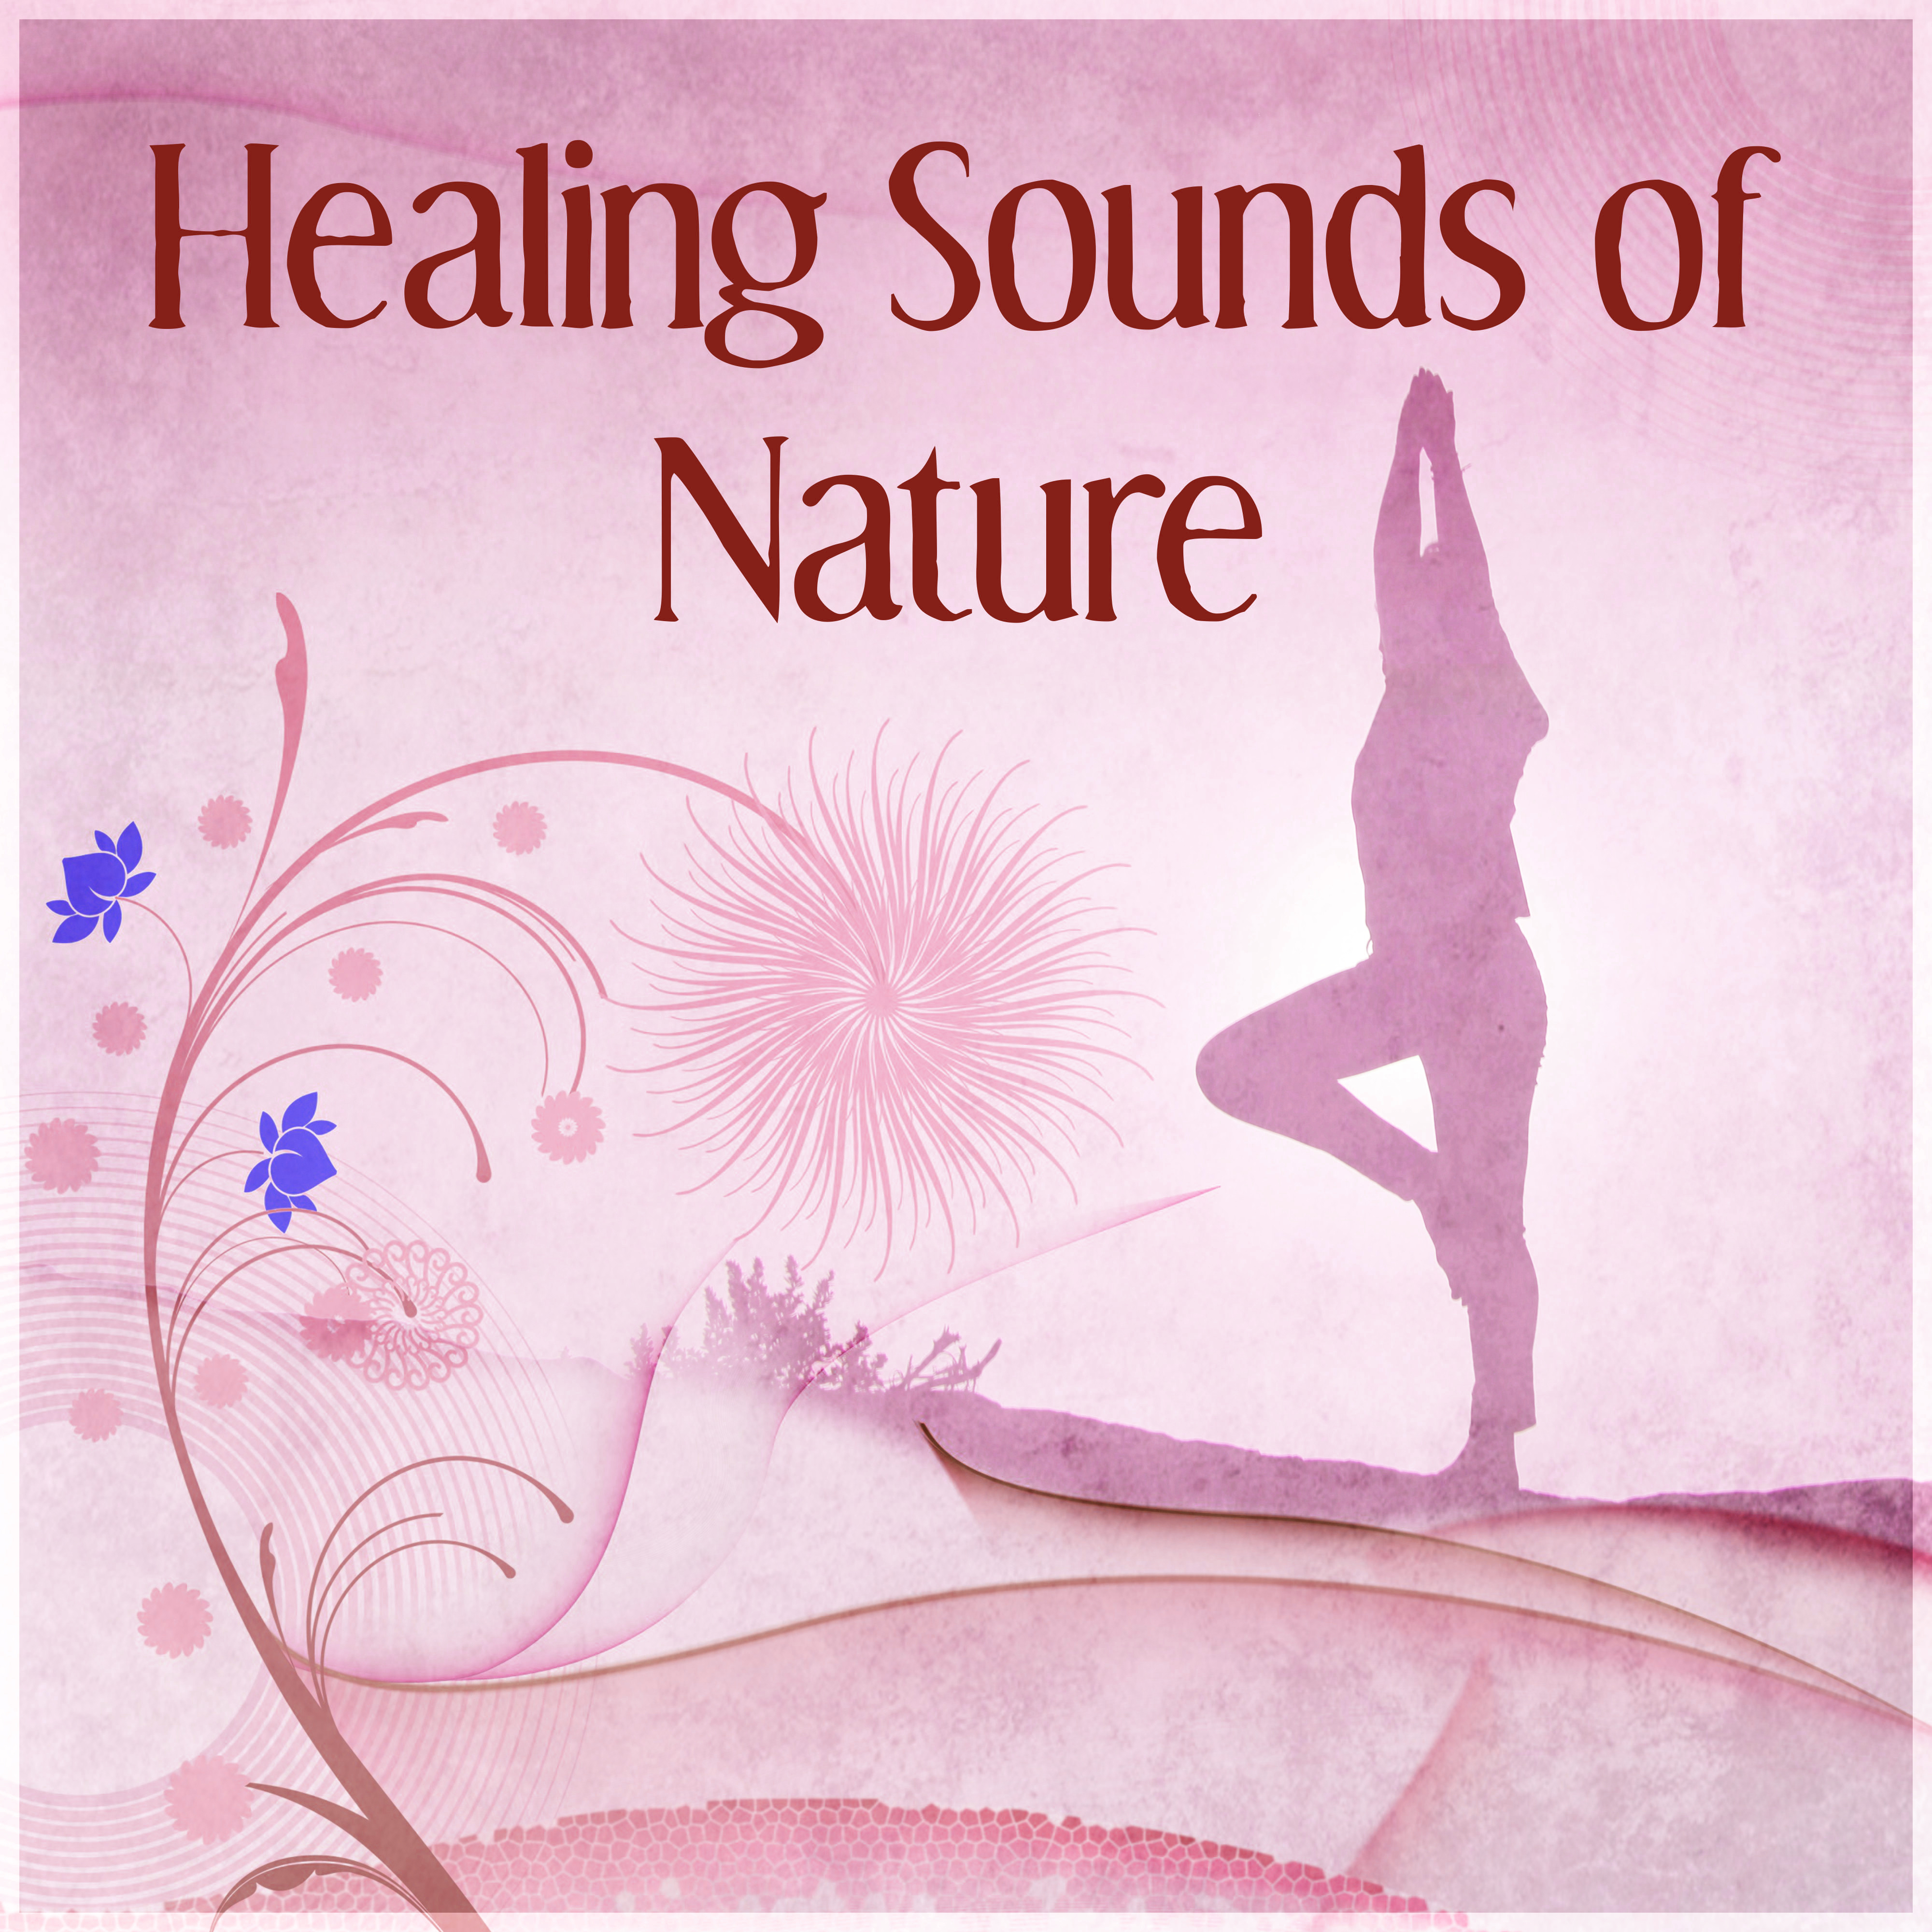 Healing Sounds of Nature  New Age Music for Deep Relaxation, Feel Inner Power with Healing Sounds, Background for Meditation, Deep Breathing